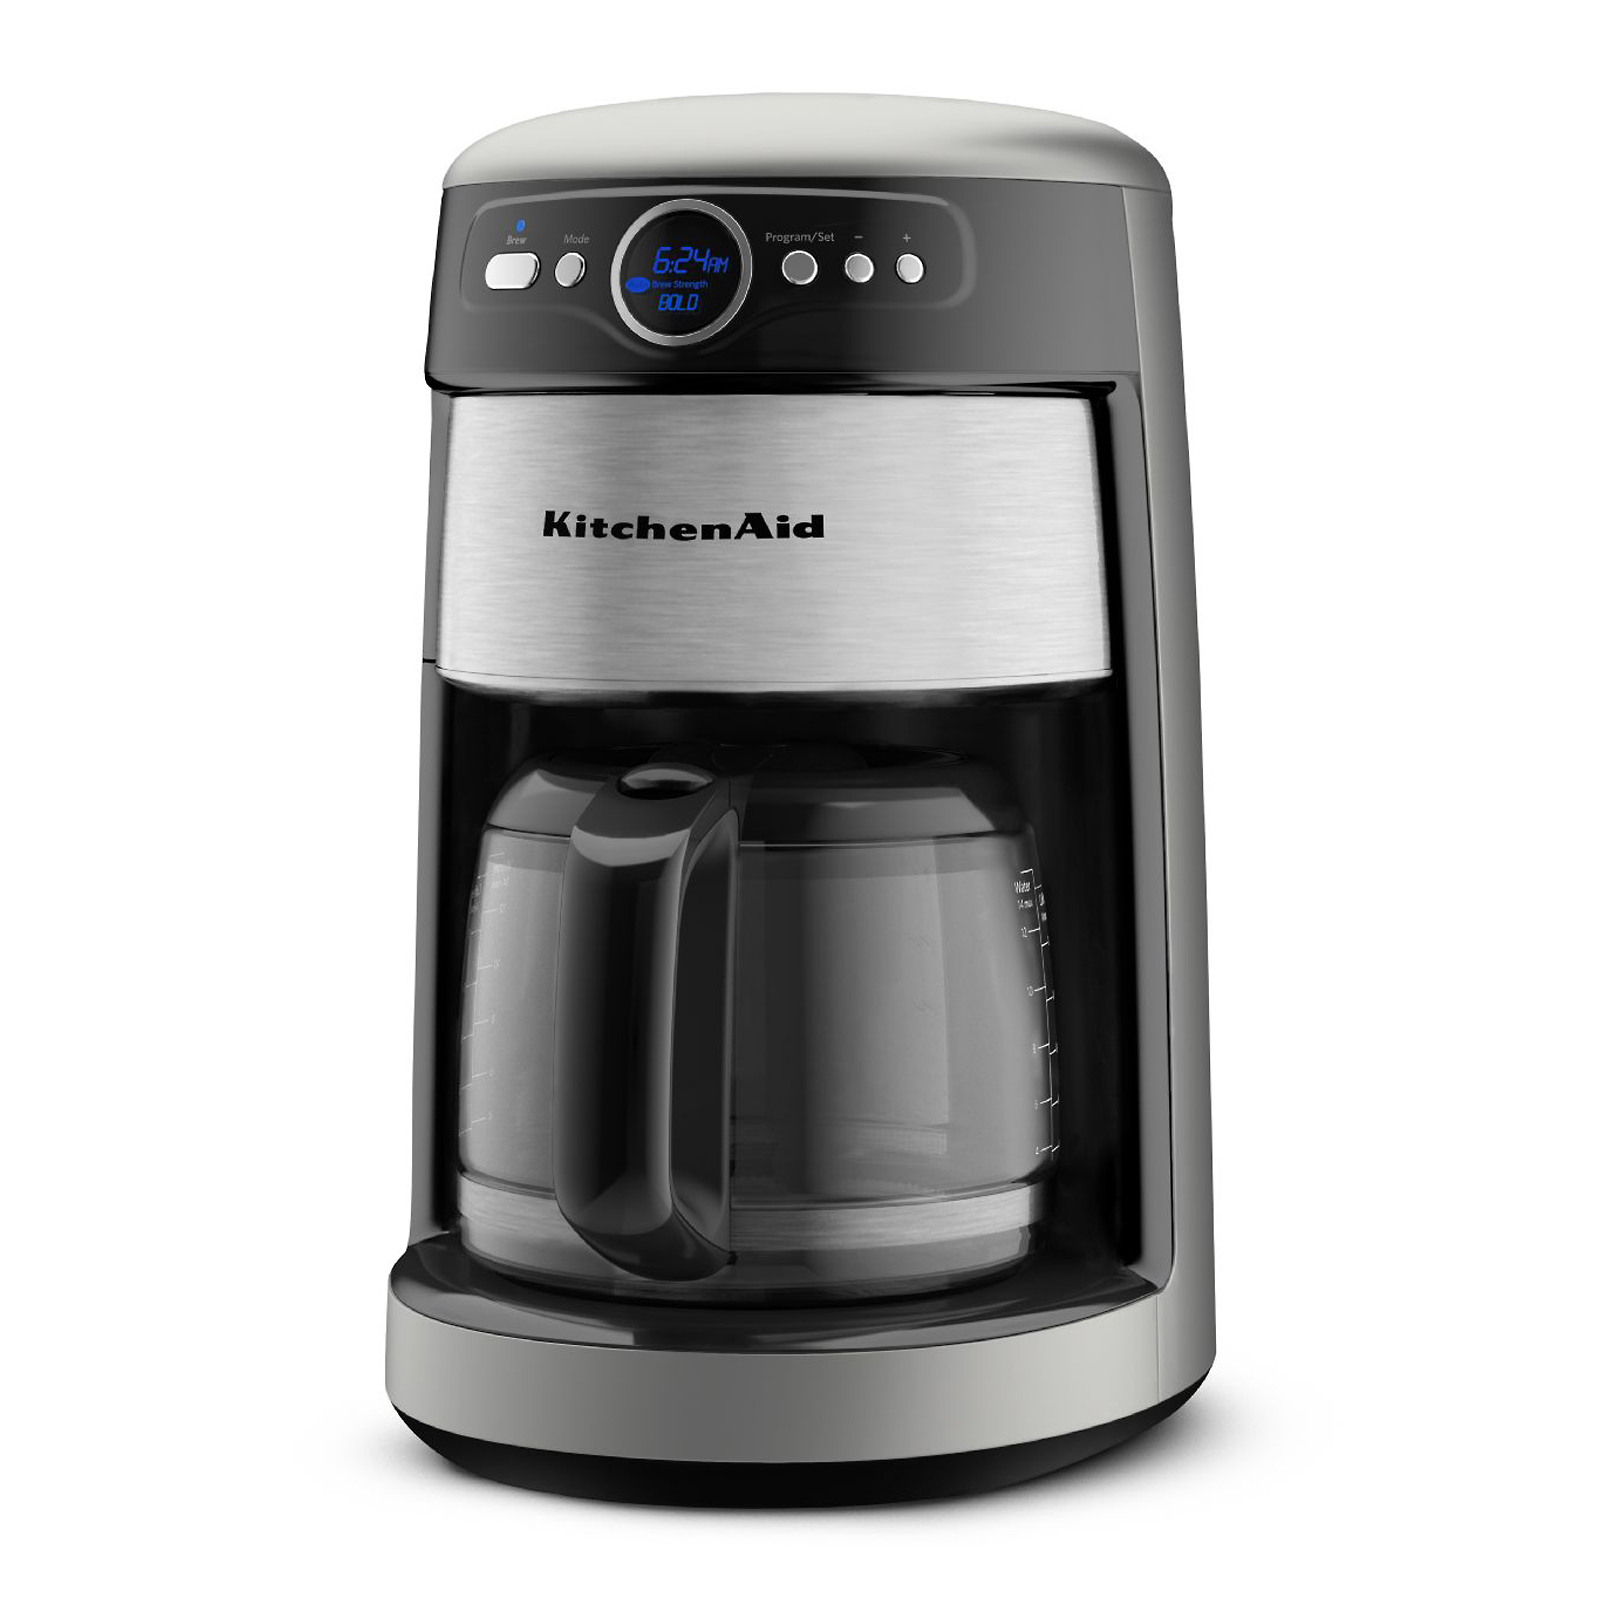 KitchenAid 14-Cup Glass Carafe Coffee Maker - Appliances - Small ...